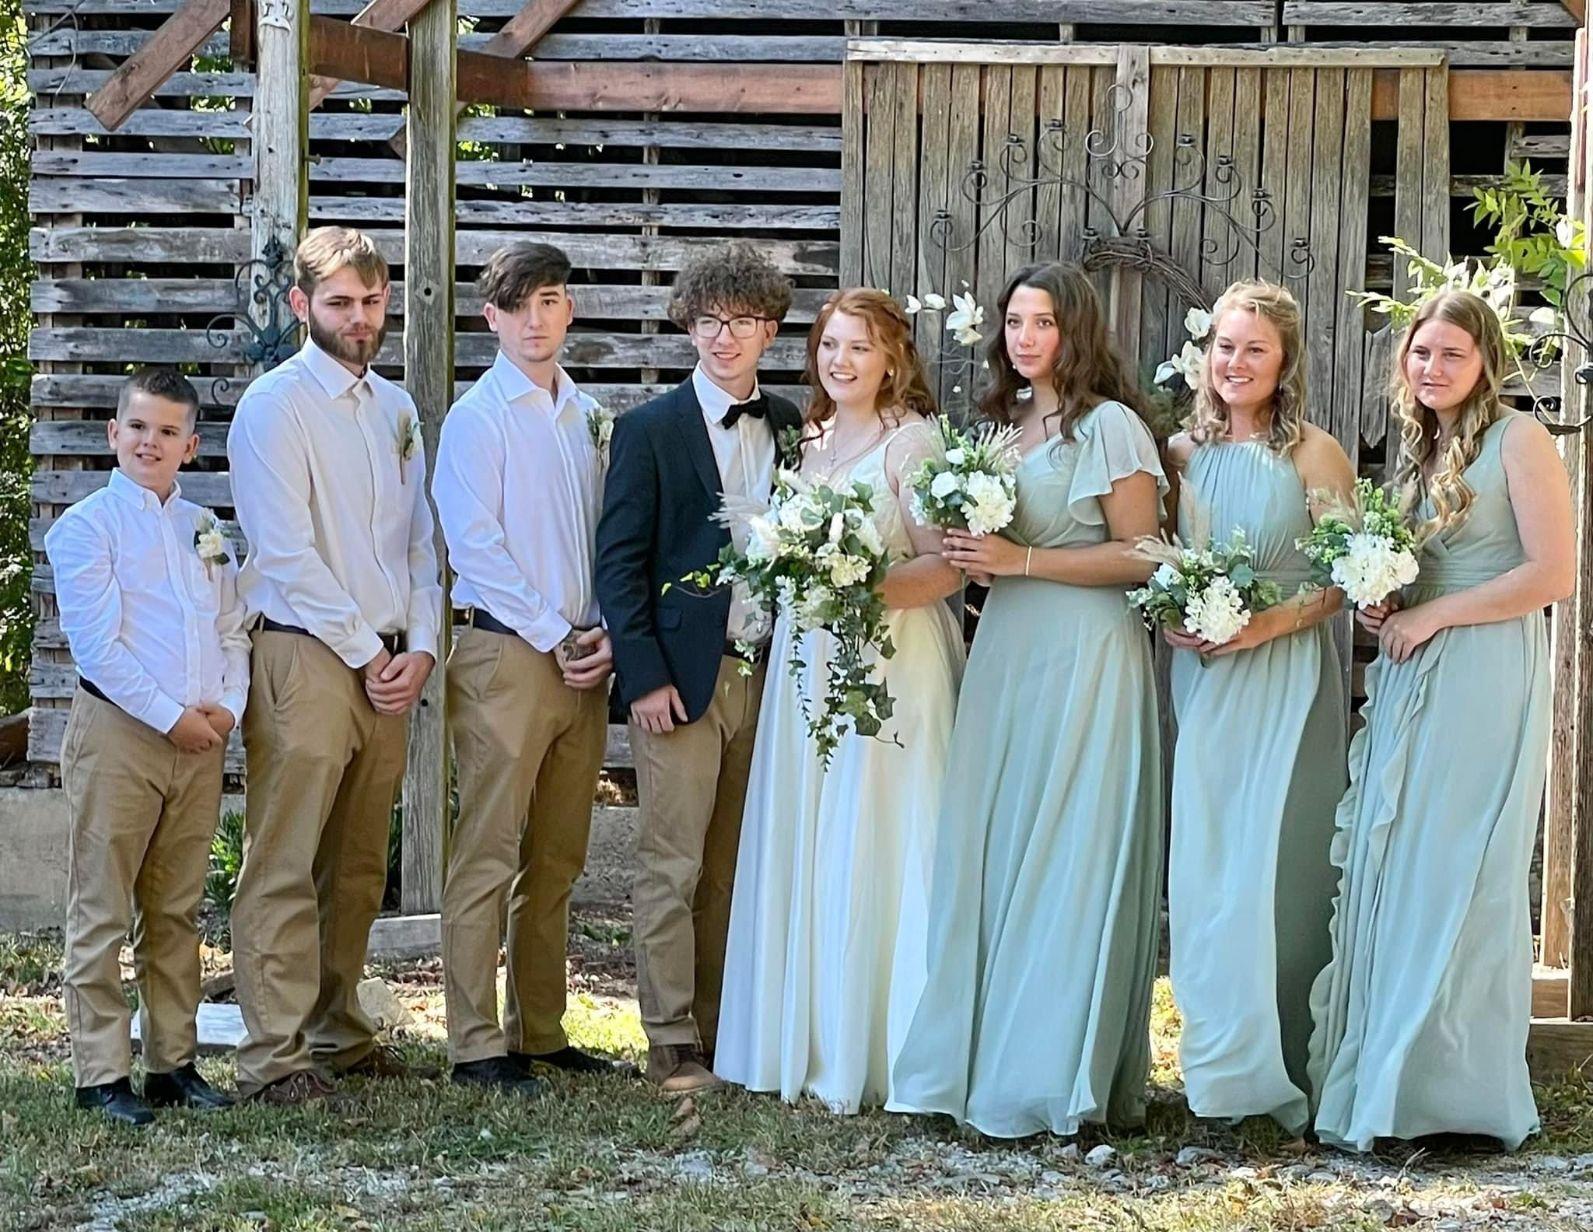 The bridal party in front of the historic outbuilding at Hayes House